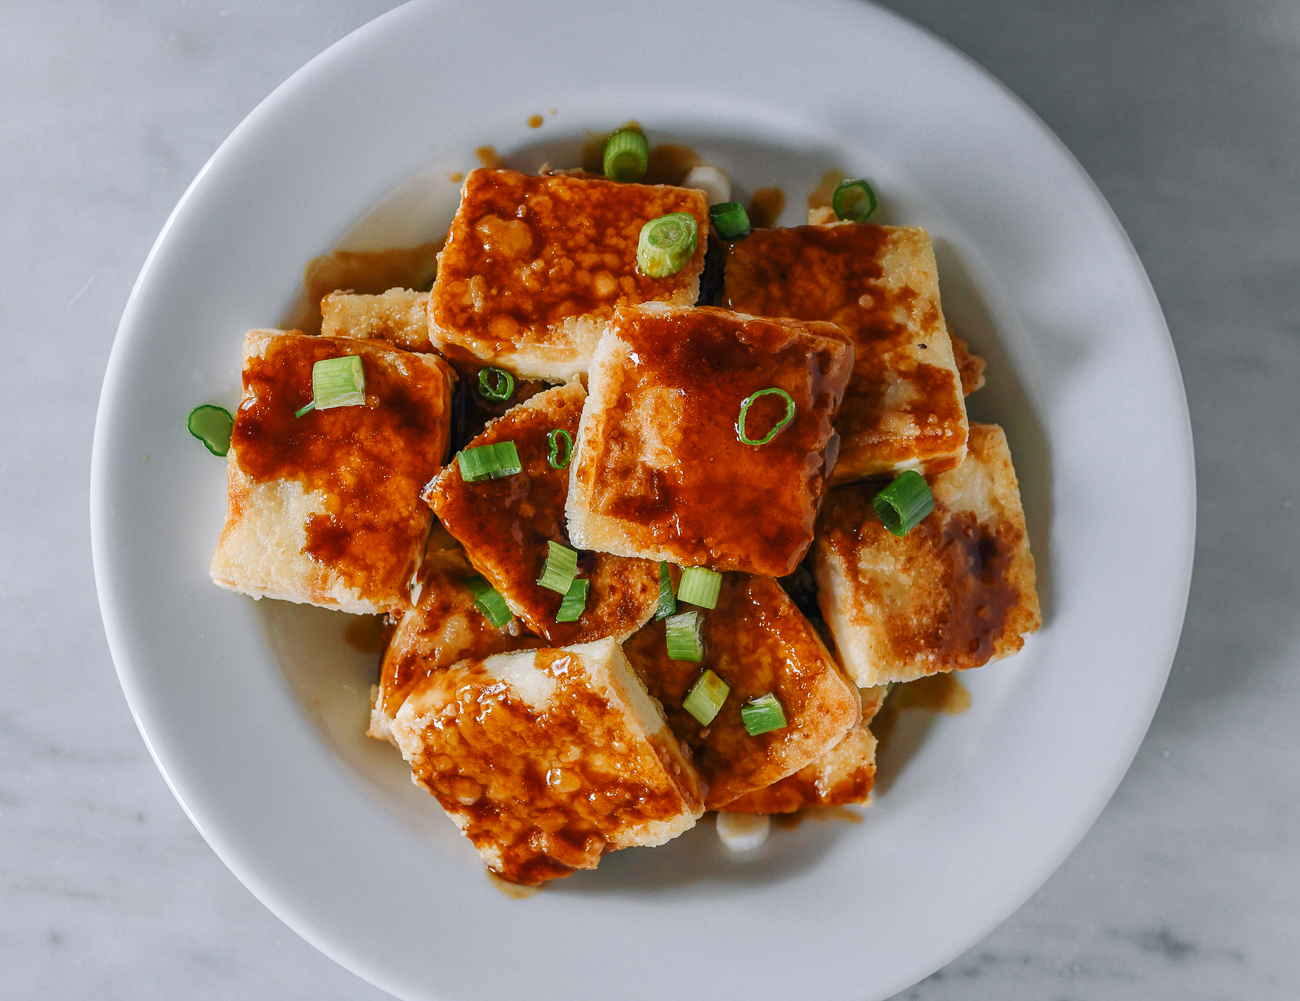 Crispy Tofu with sauce drizzled over the top and scallions